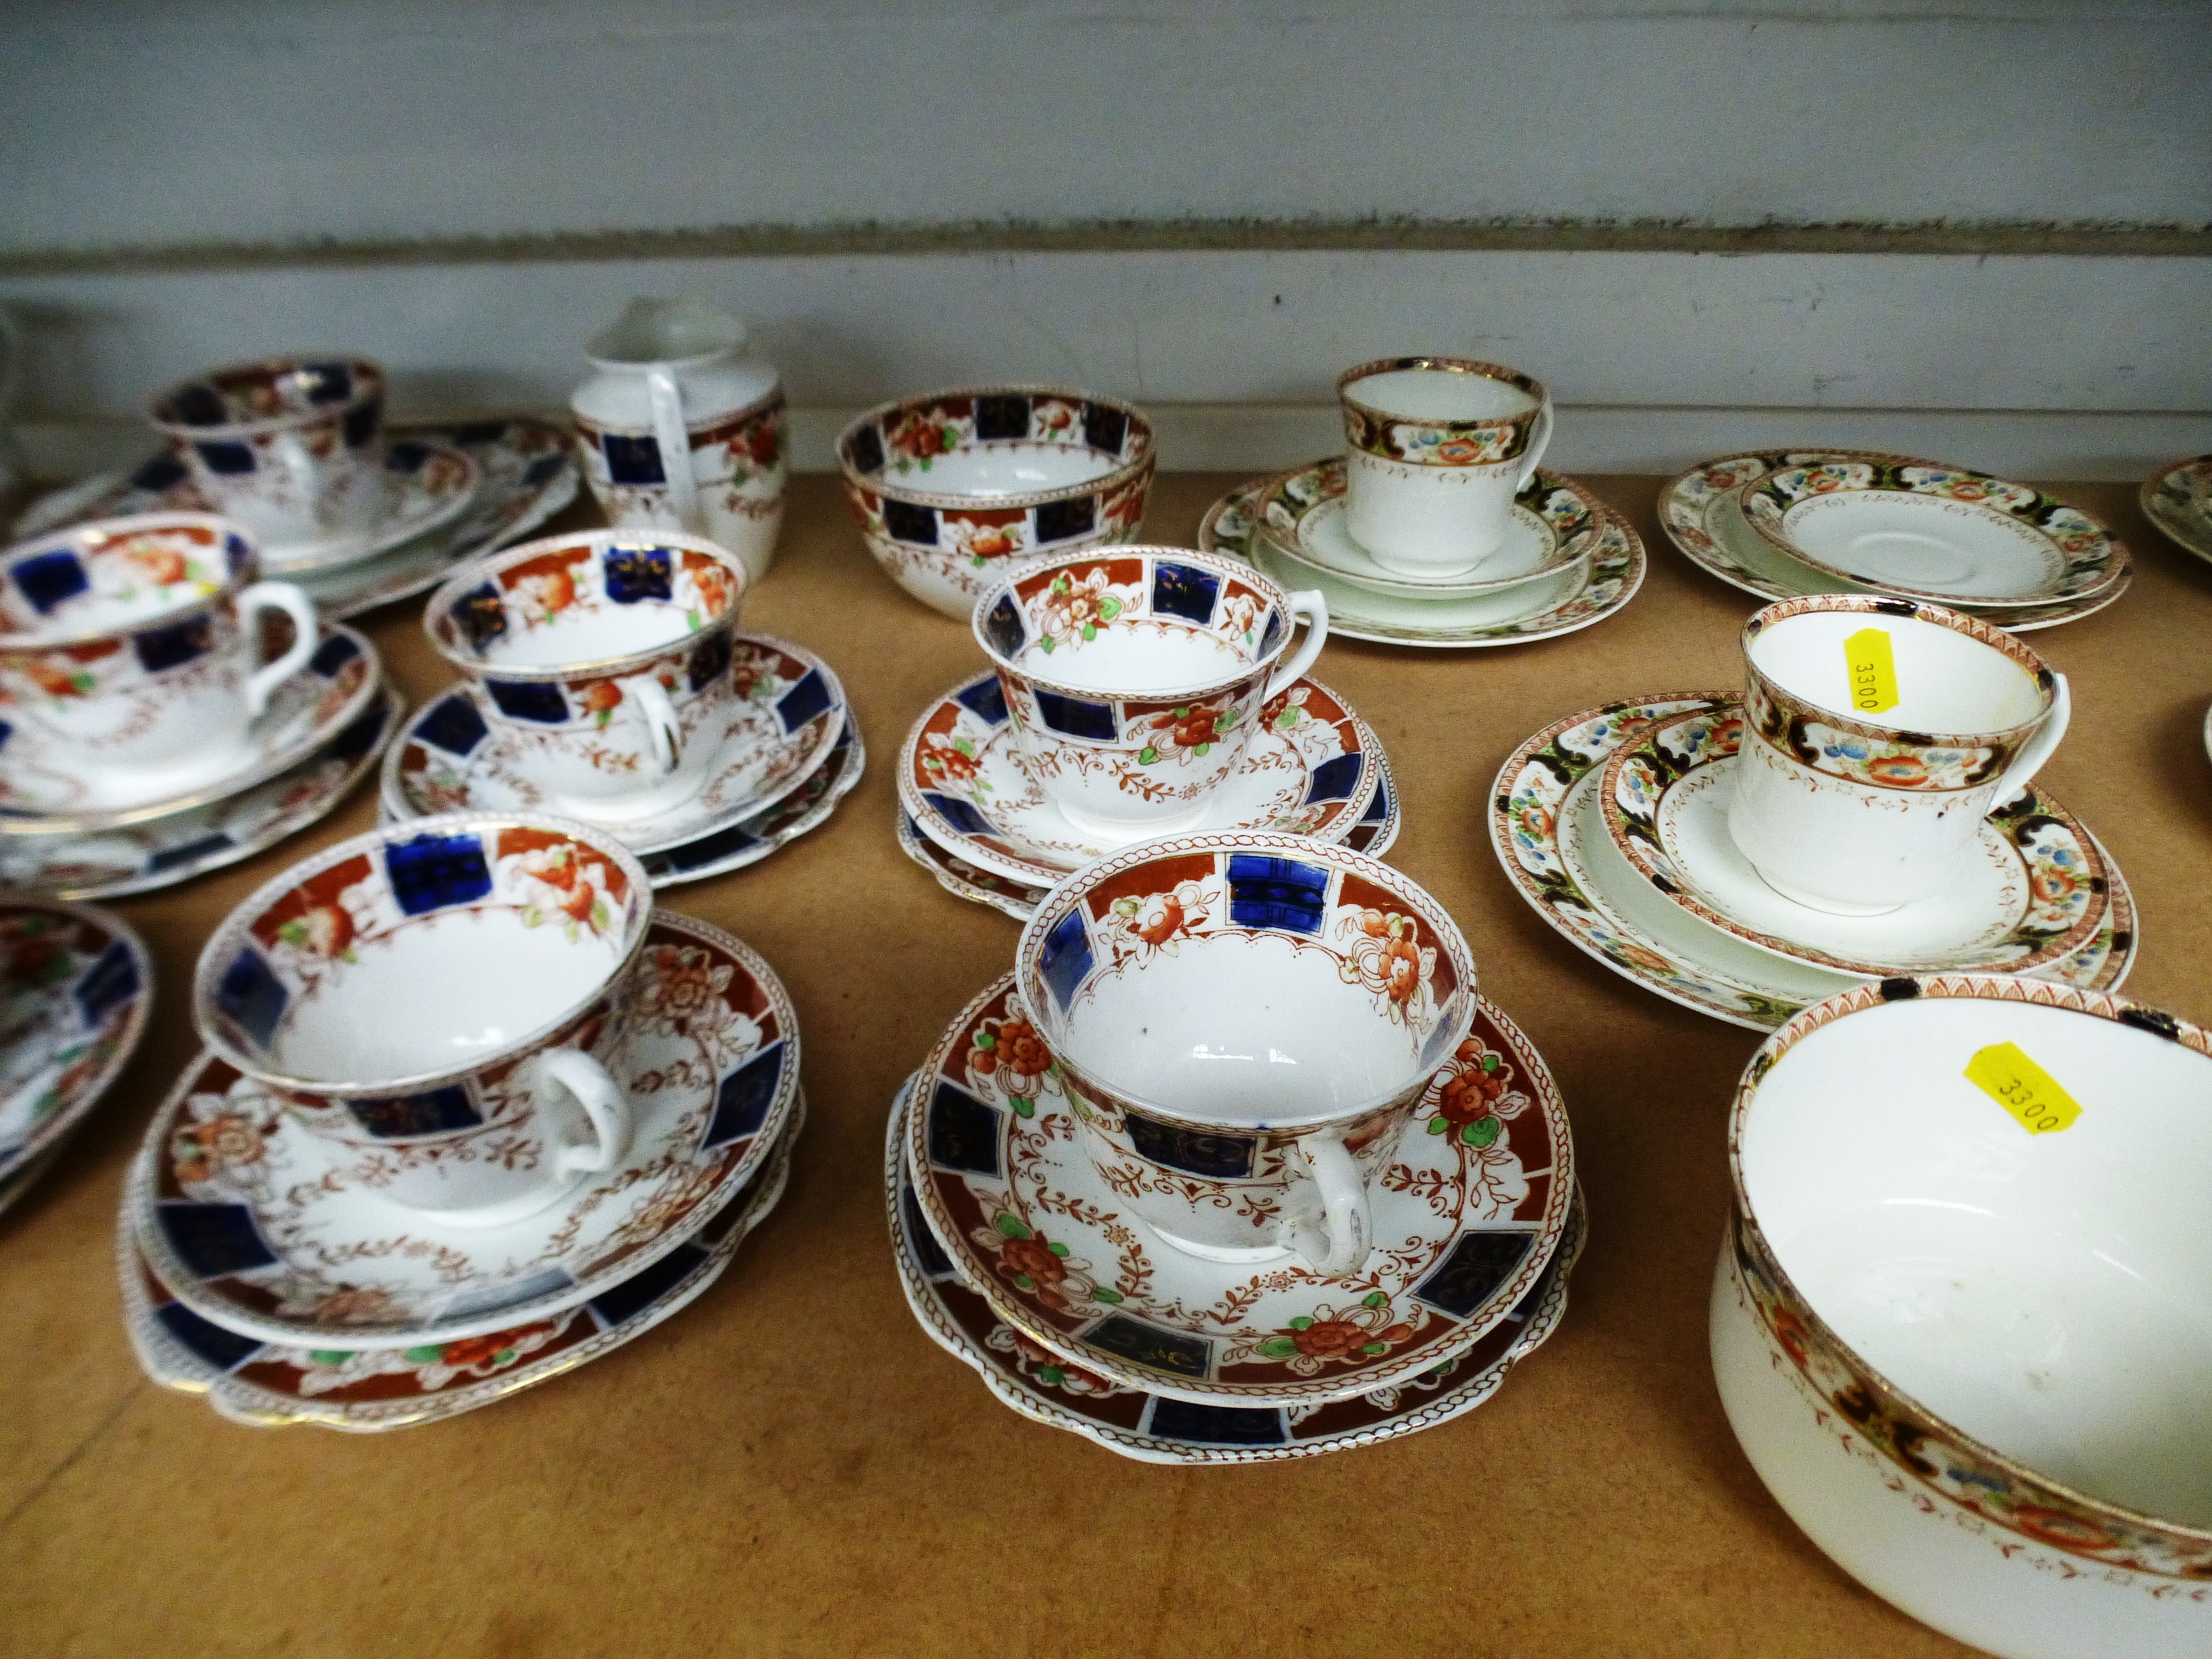 3 PART TEASETS INCLUDING DELPHINE AND CARLISLE WARE - Image 4 of 10